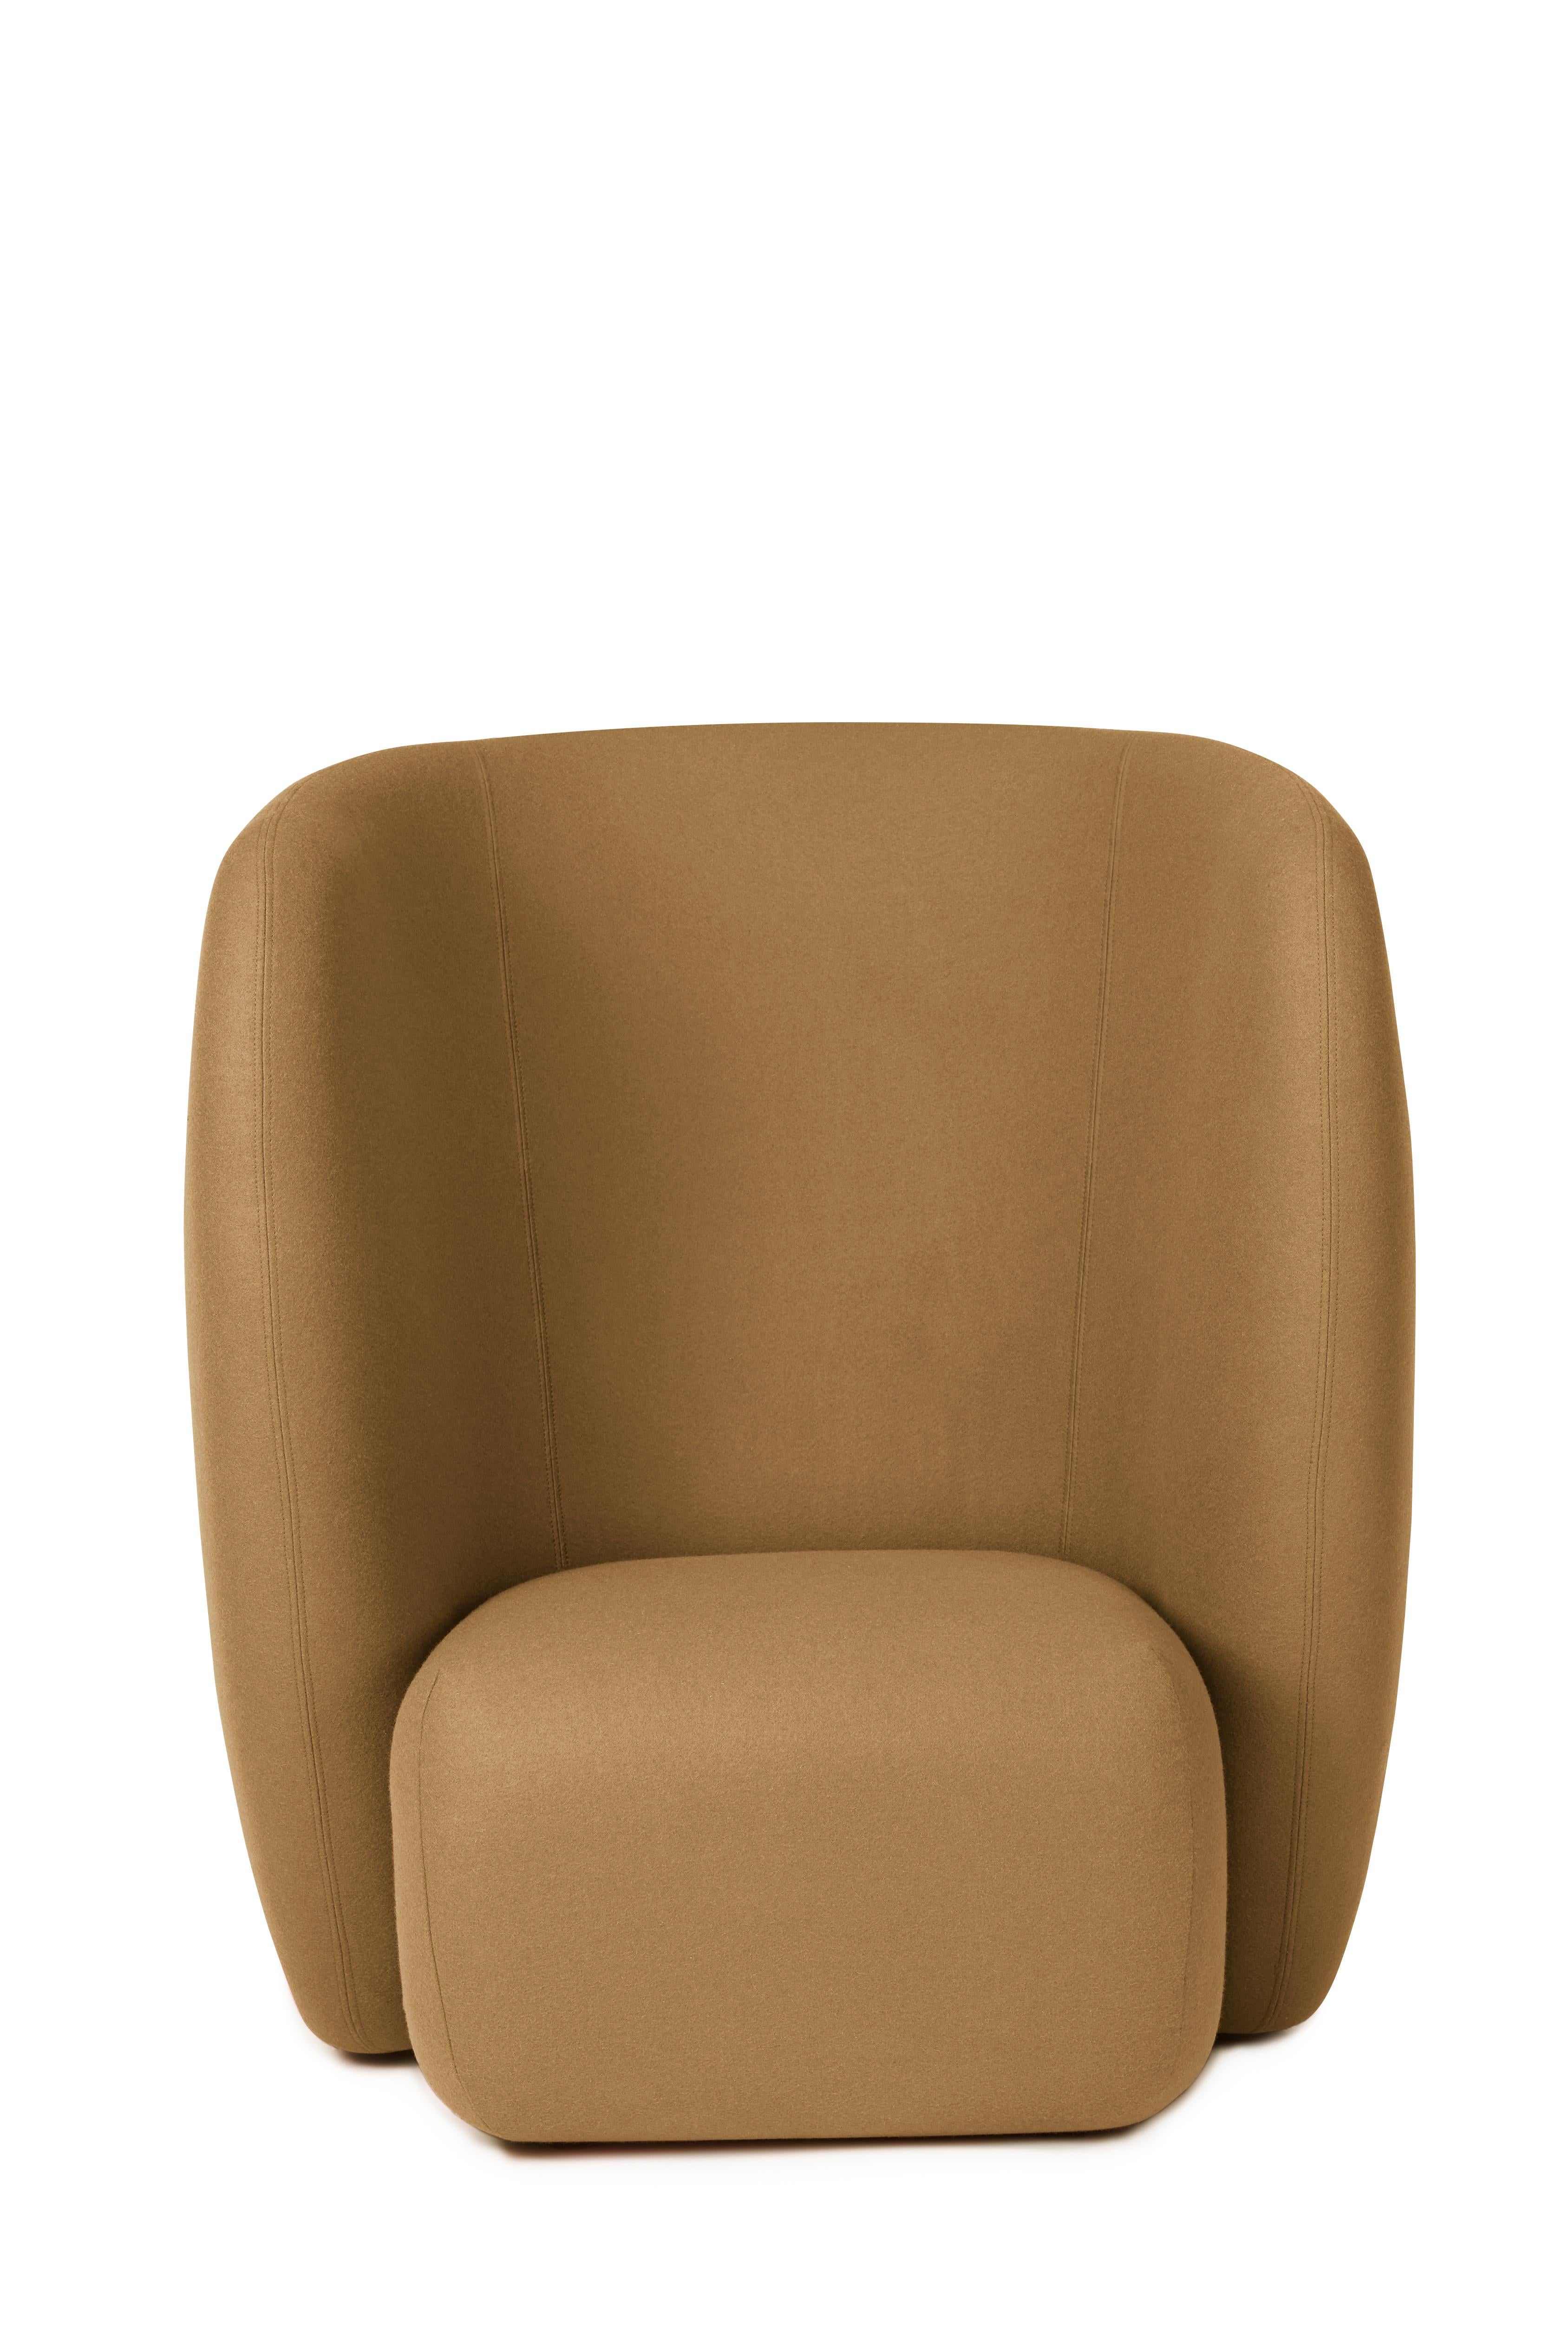 For Sale: Green (Hero 981) Haven Lounge Chair, by Charlotte Høncke from Warm Nordic